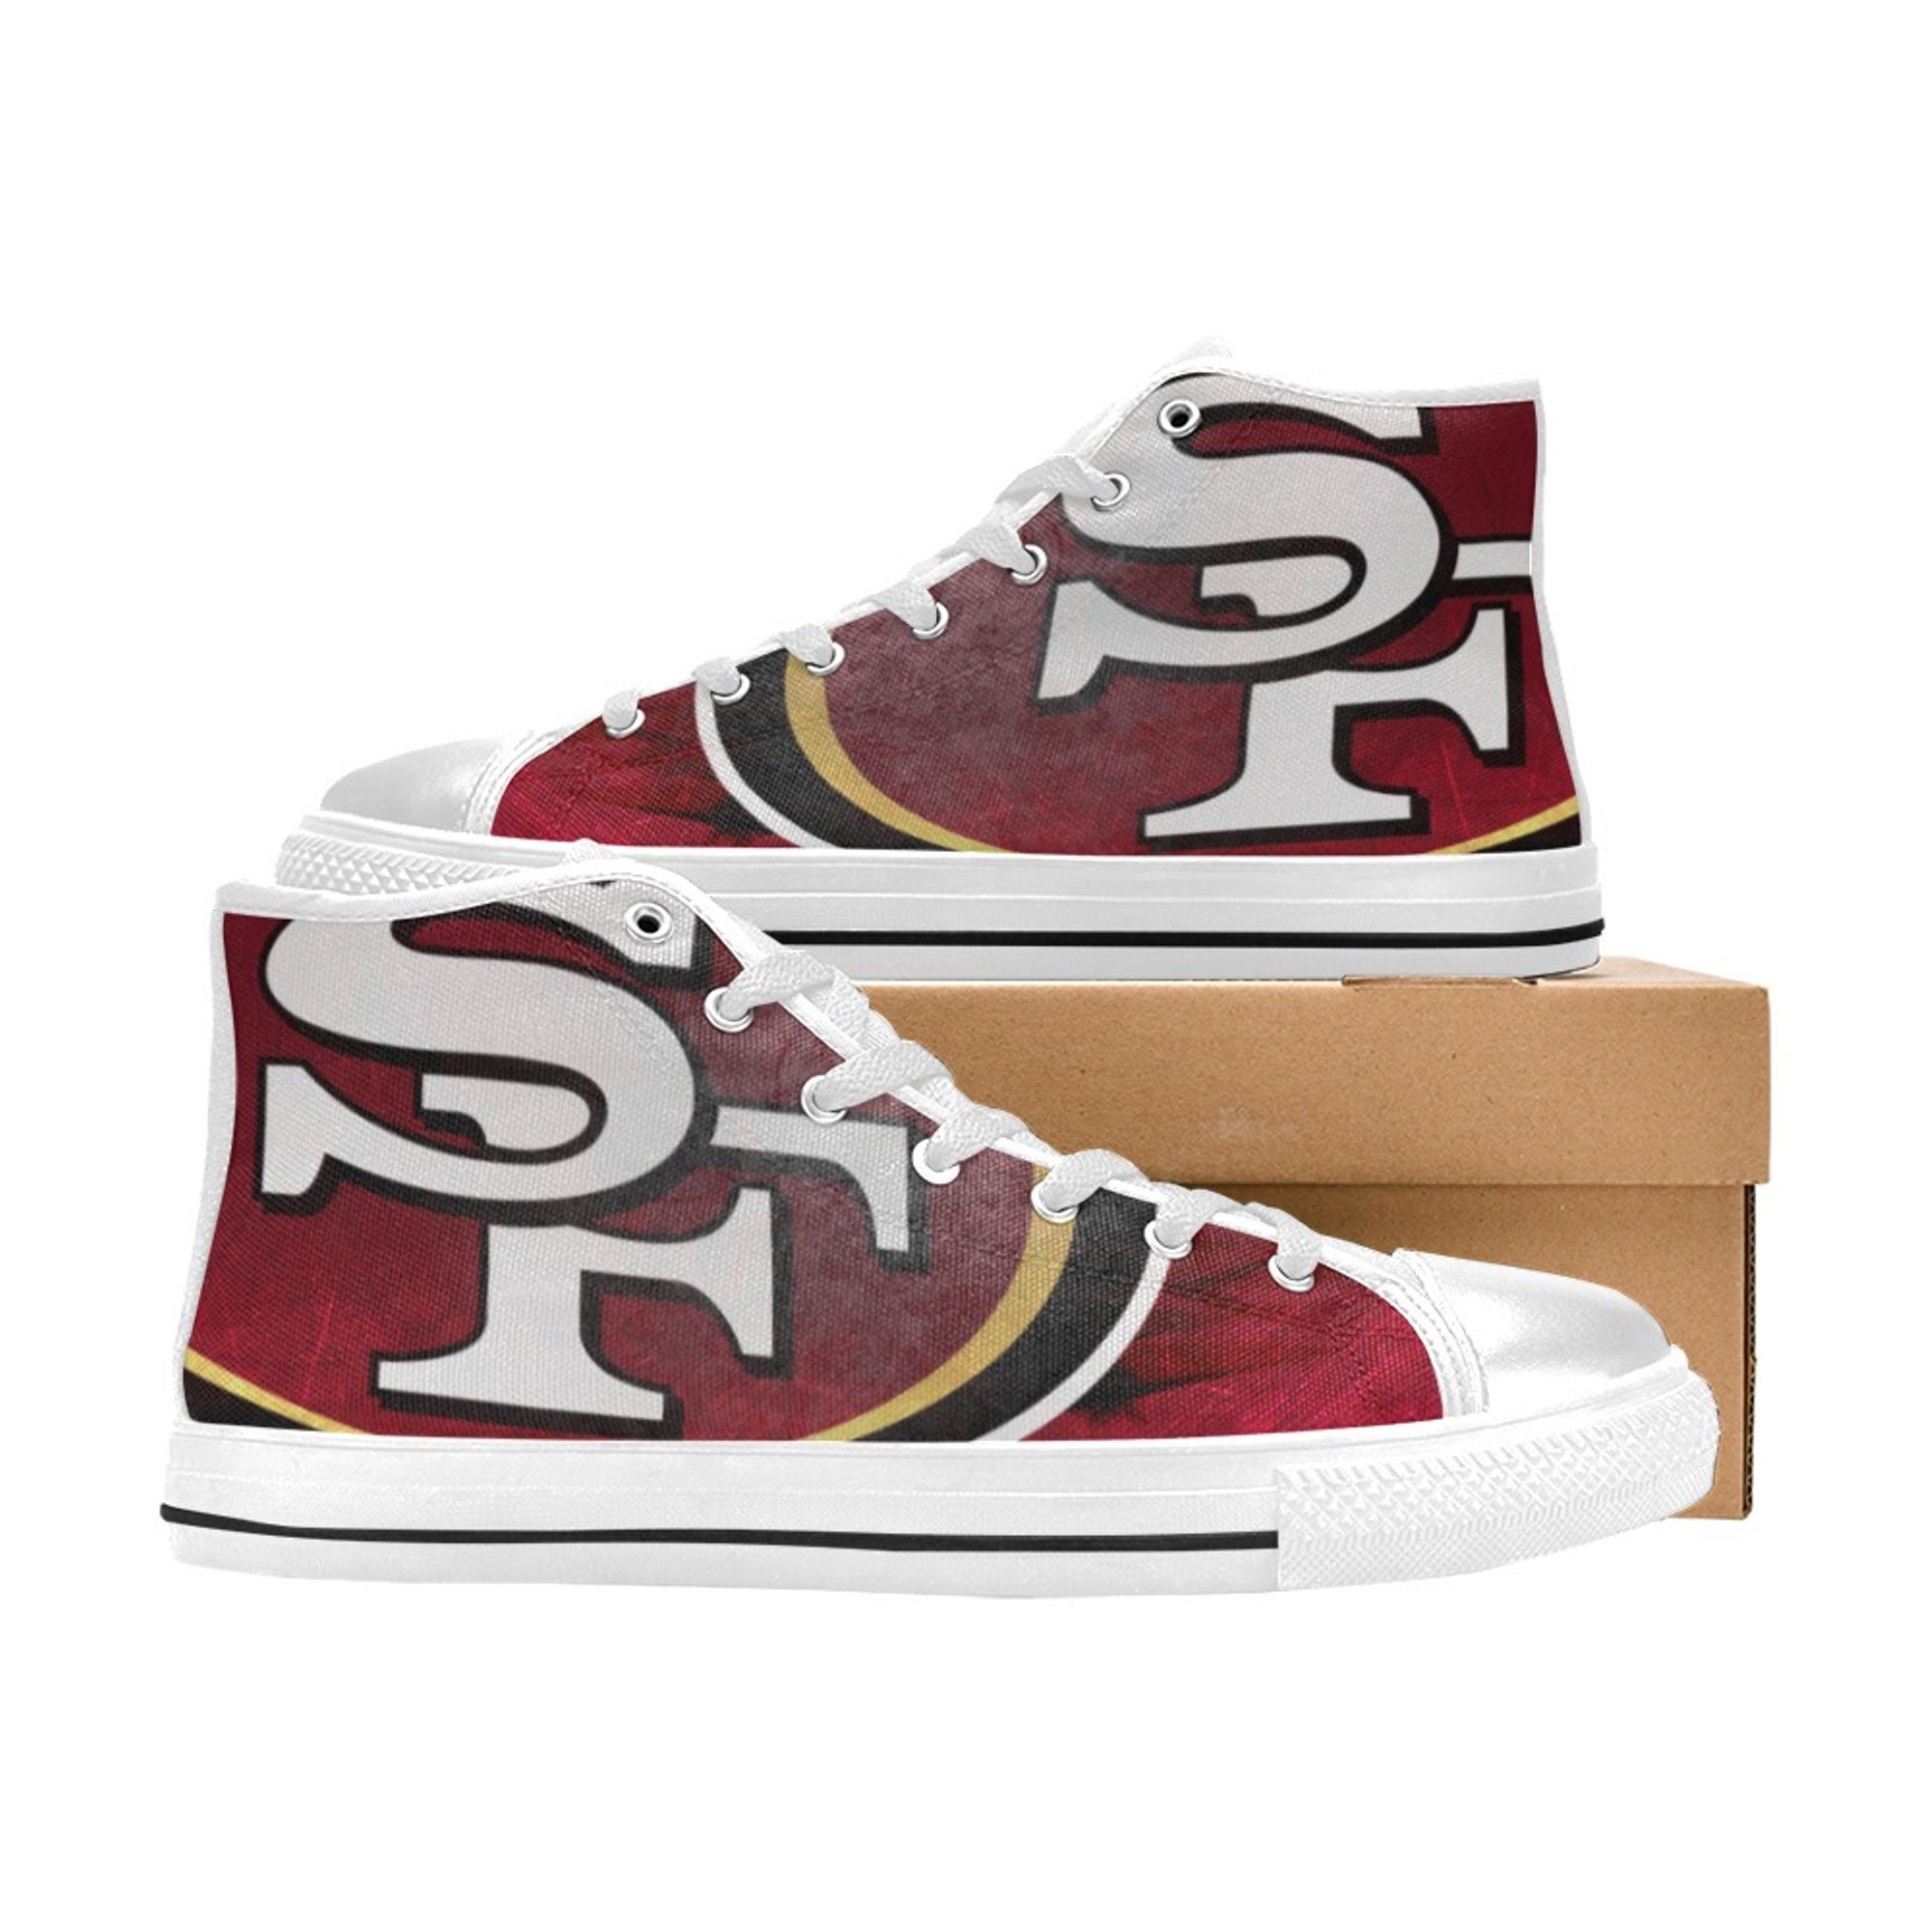 San Francisco 49ers Sneakers Themed Custom Shoes Sneakers For | Etsy